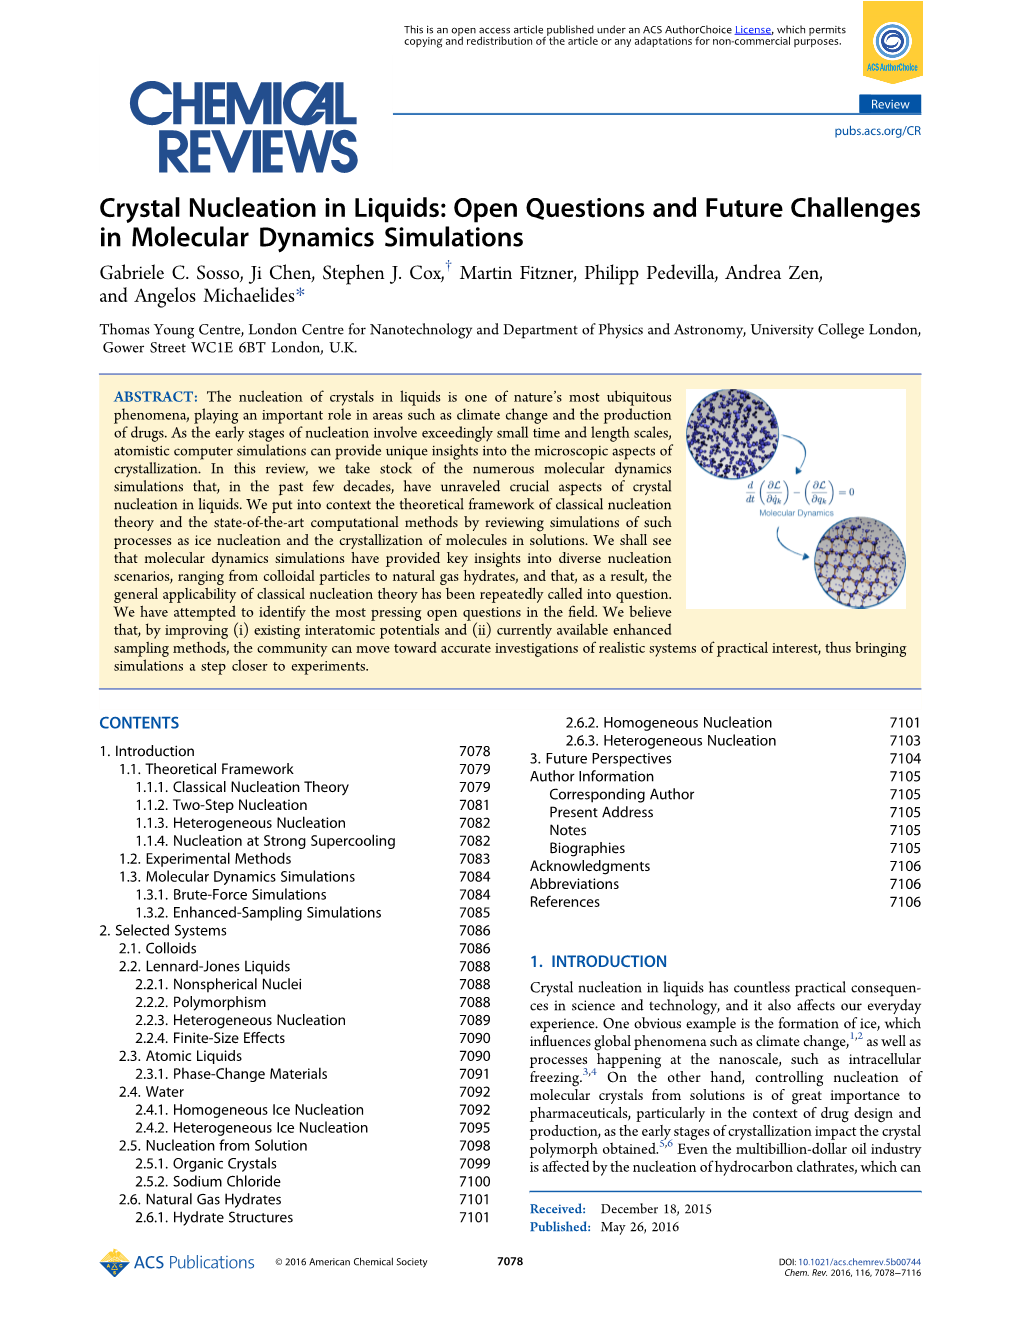 Crystal Nucleation in Liquids: Open Questions and Future Challenges in Molecular Dynamics Simulations † Gabriele C